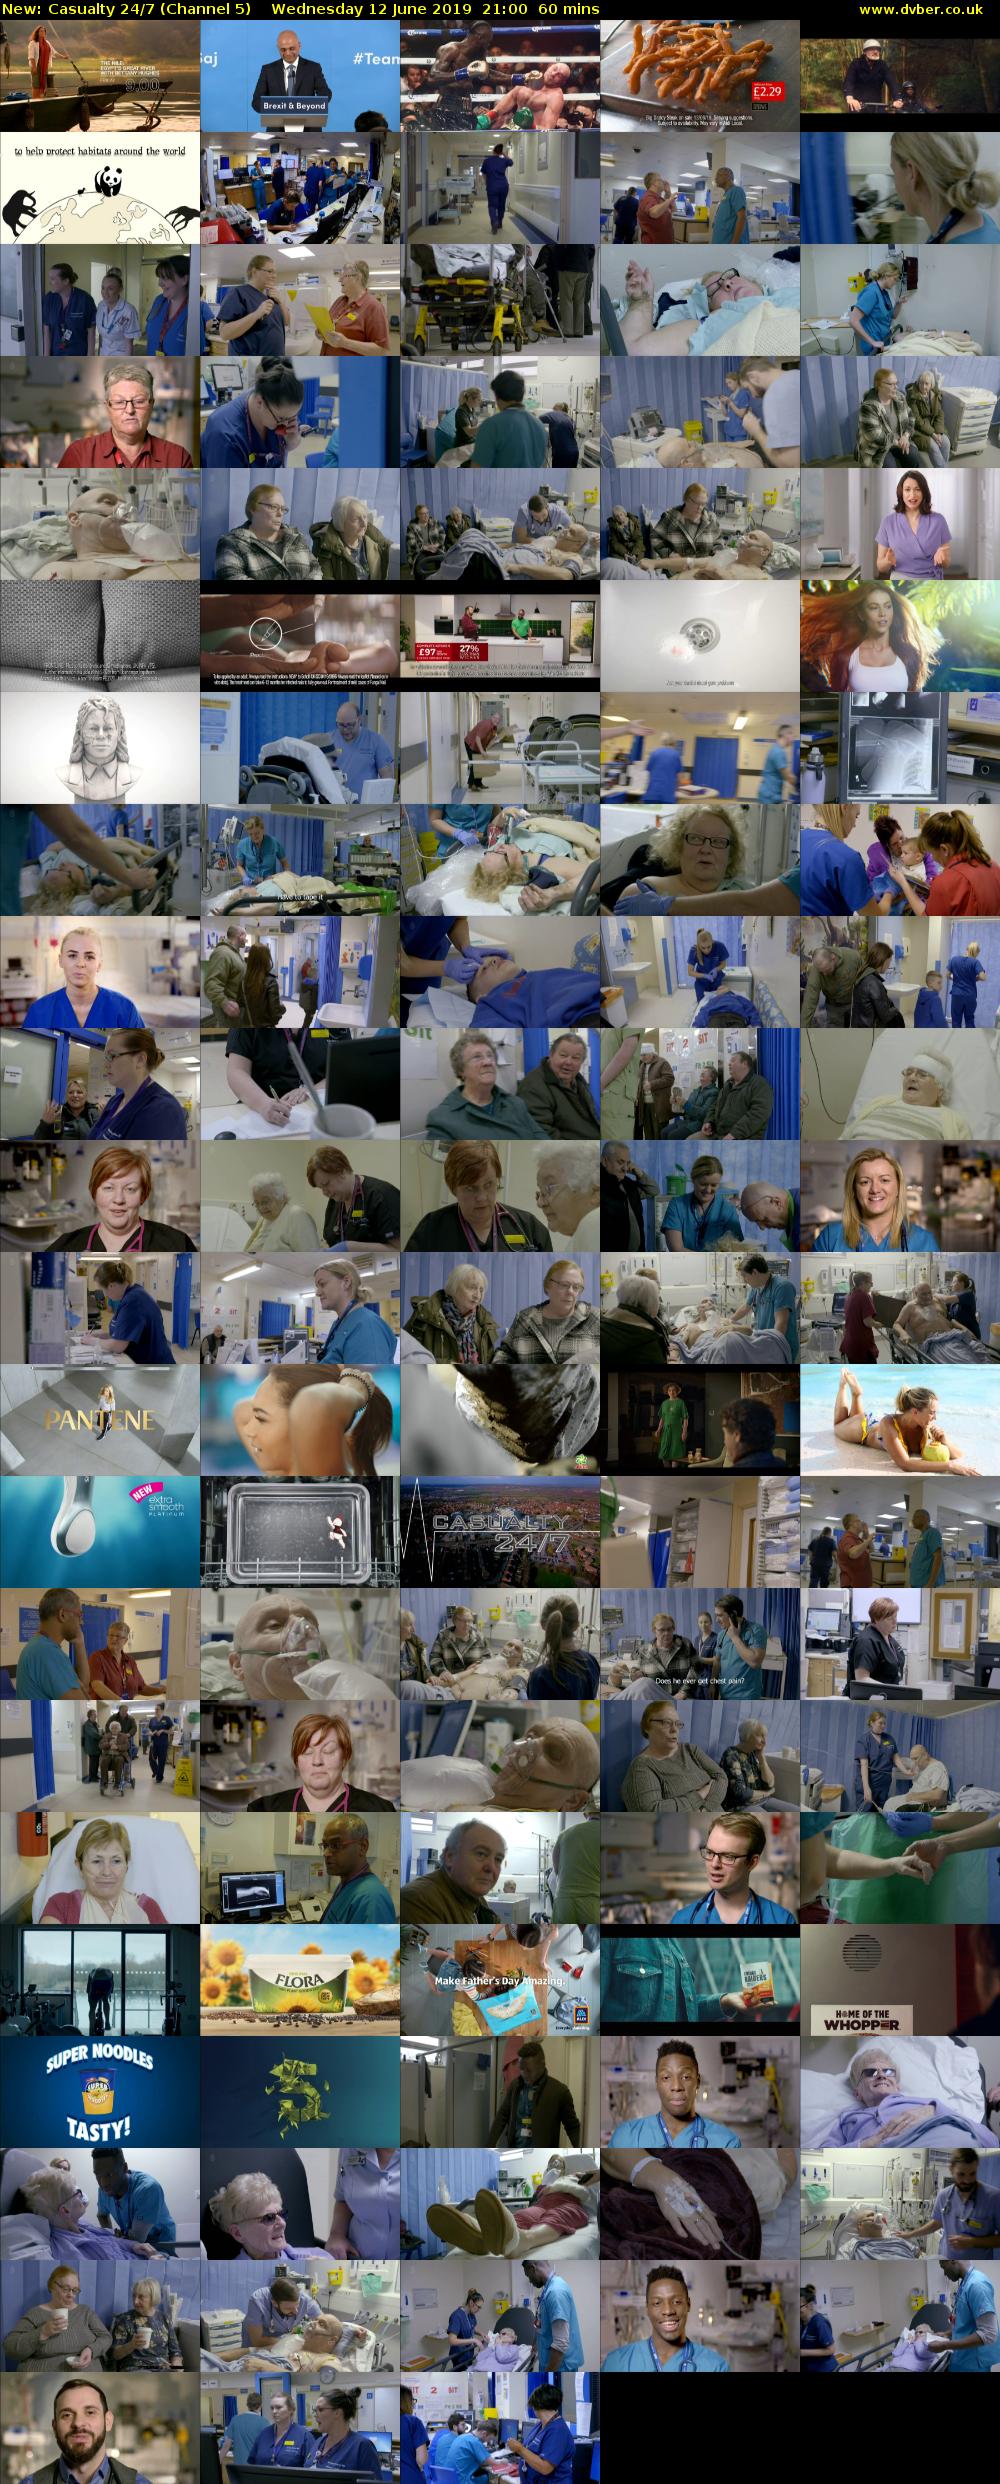 Casualty 24/7 (Channel 5) Wednesday 12 June 2019 21:00 - 22:00